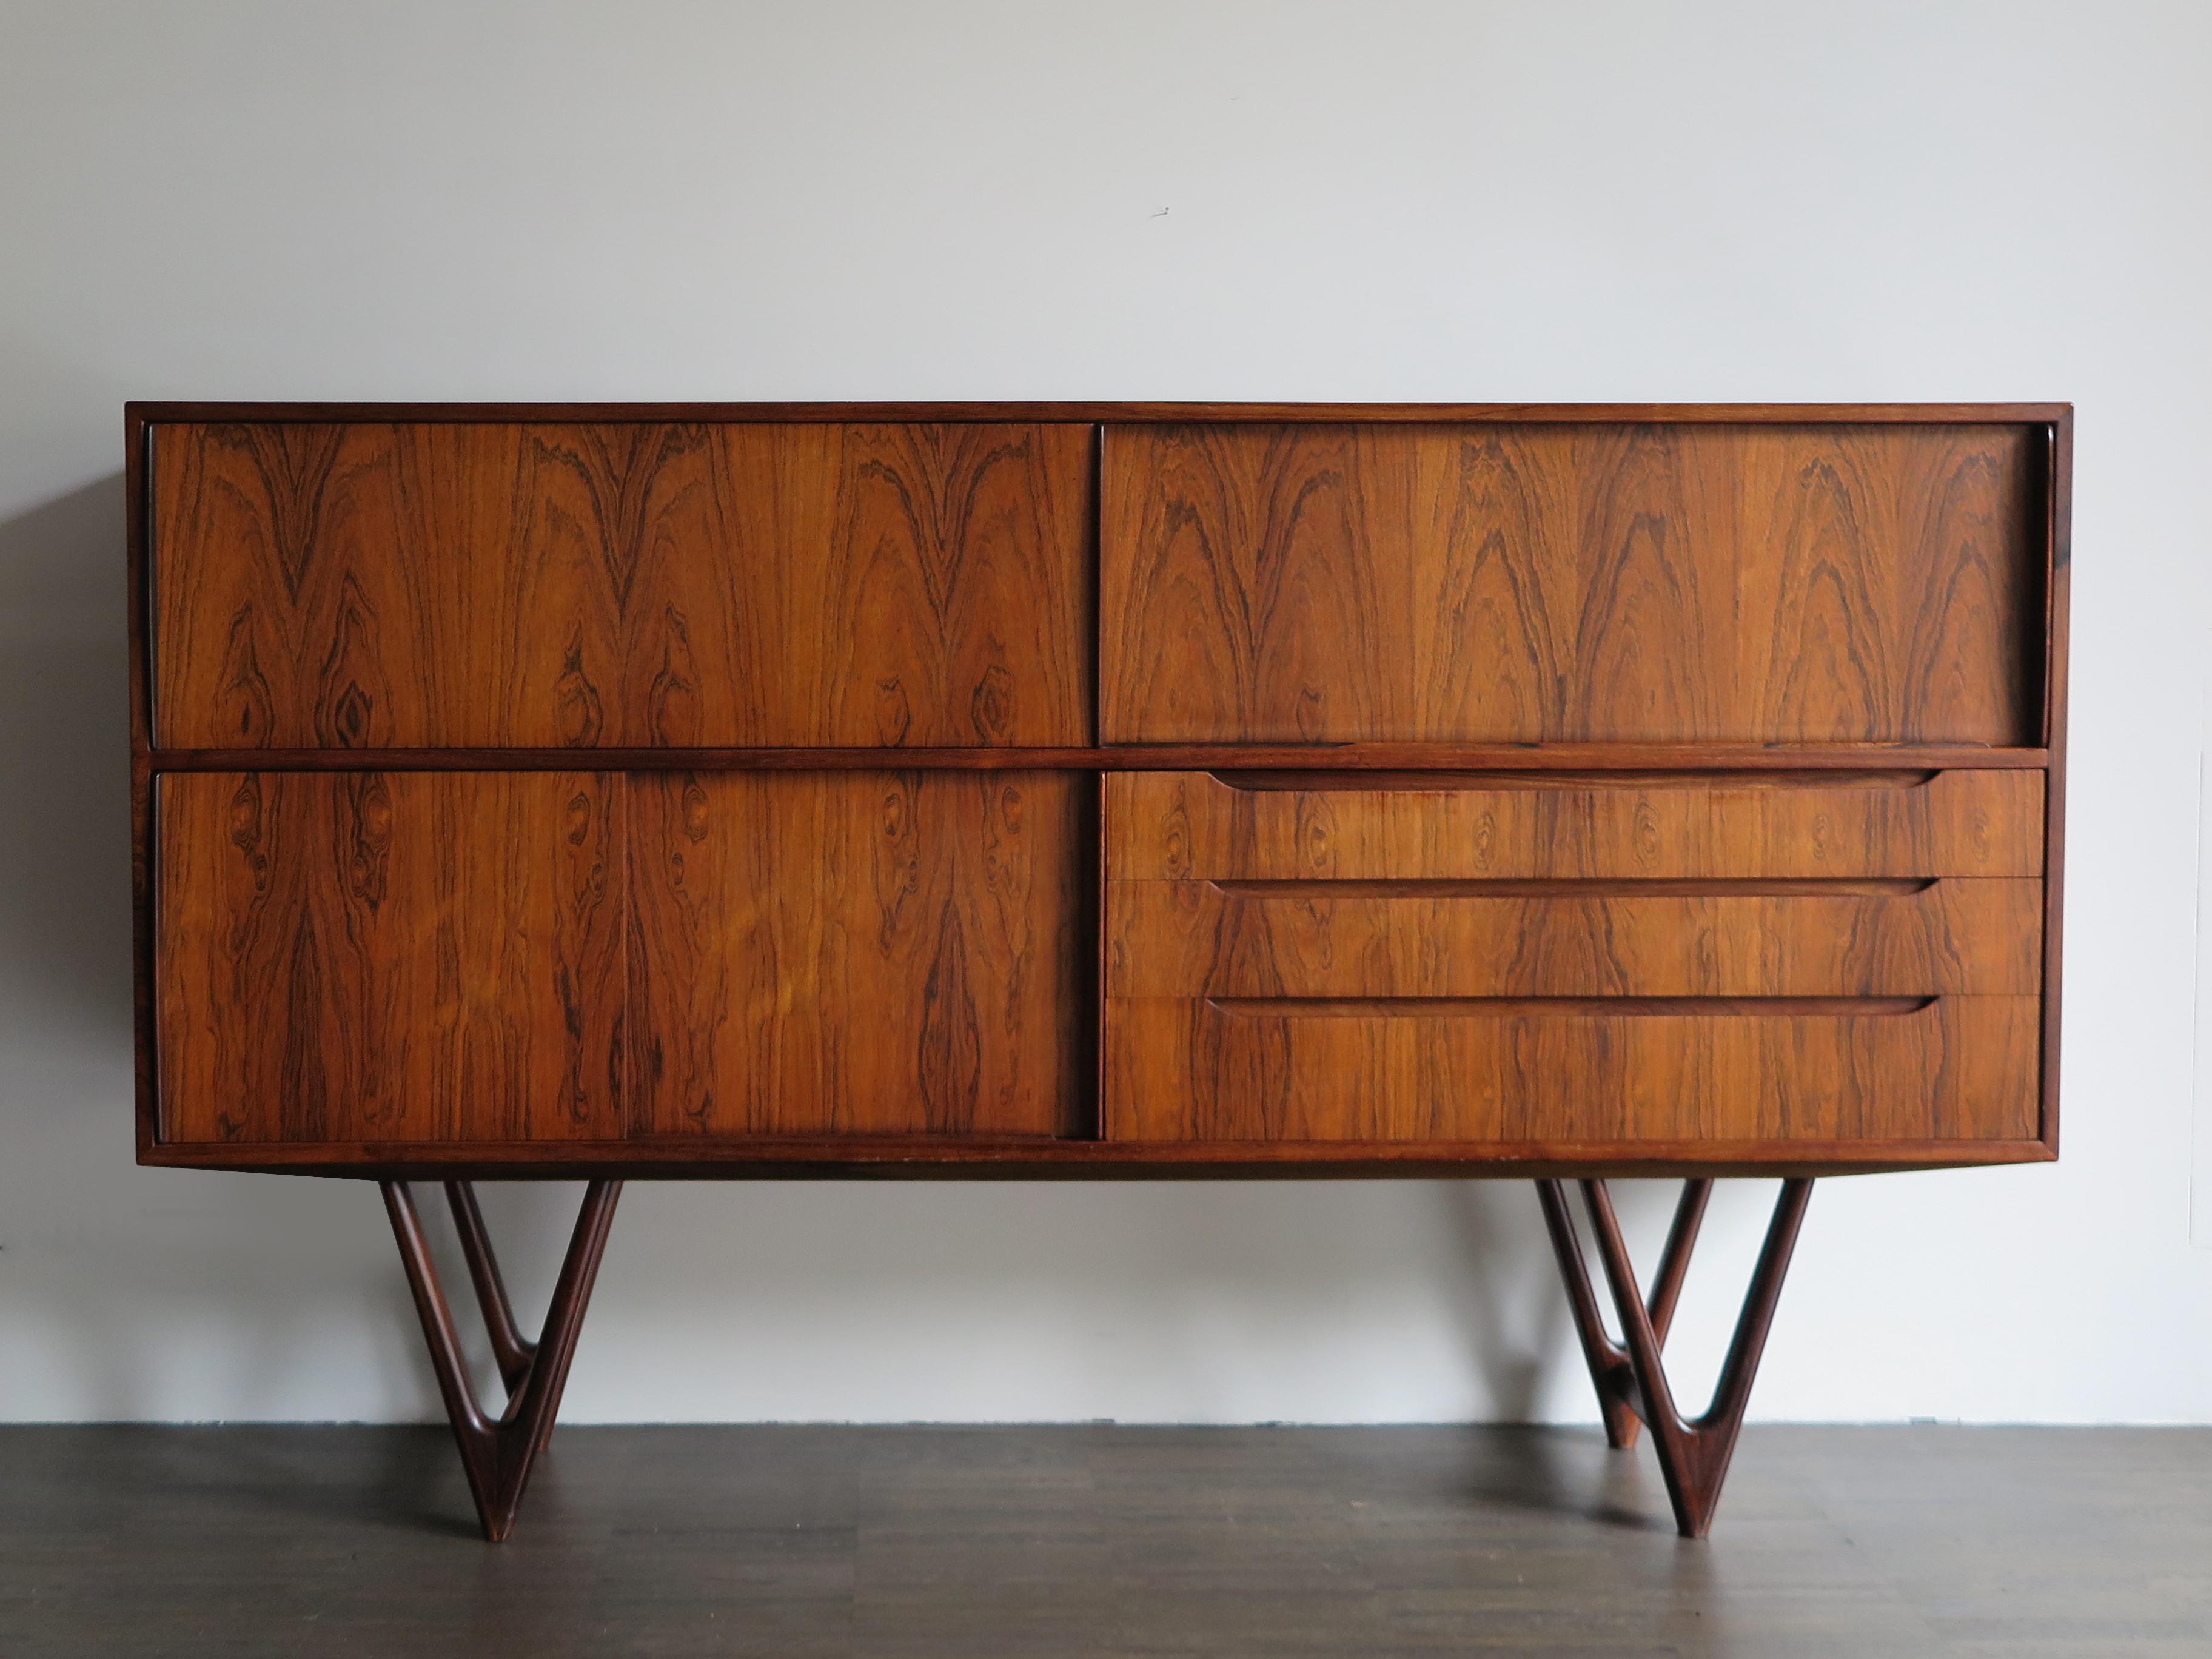 Scandinavian Mid-Century Modern design dark wood hight sideboard designed by Kurt Østervig and produced by Randers Mobelvaerk, with three sliding doors and three drawers, Denmark 1960s
Please note that the item is original of the period and this